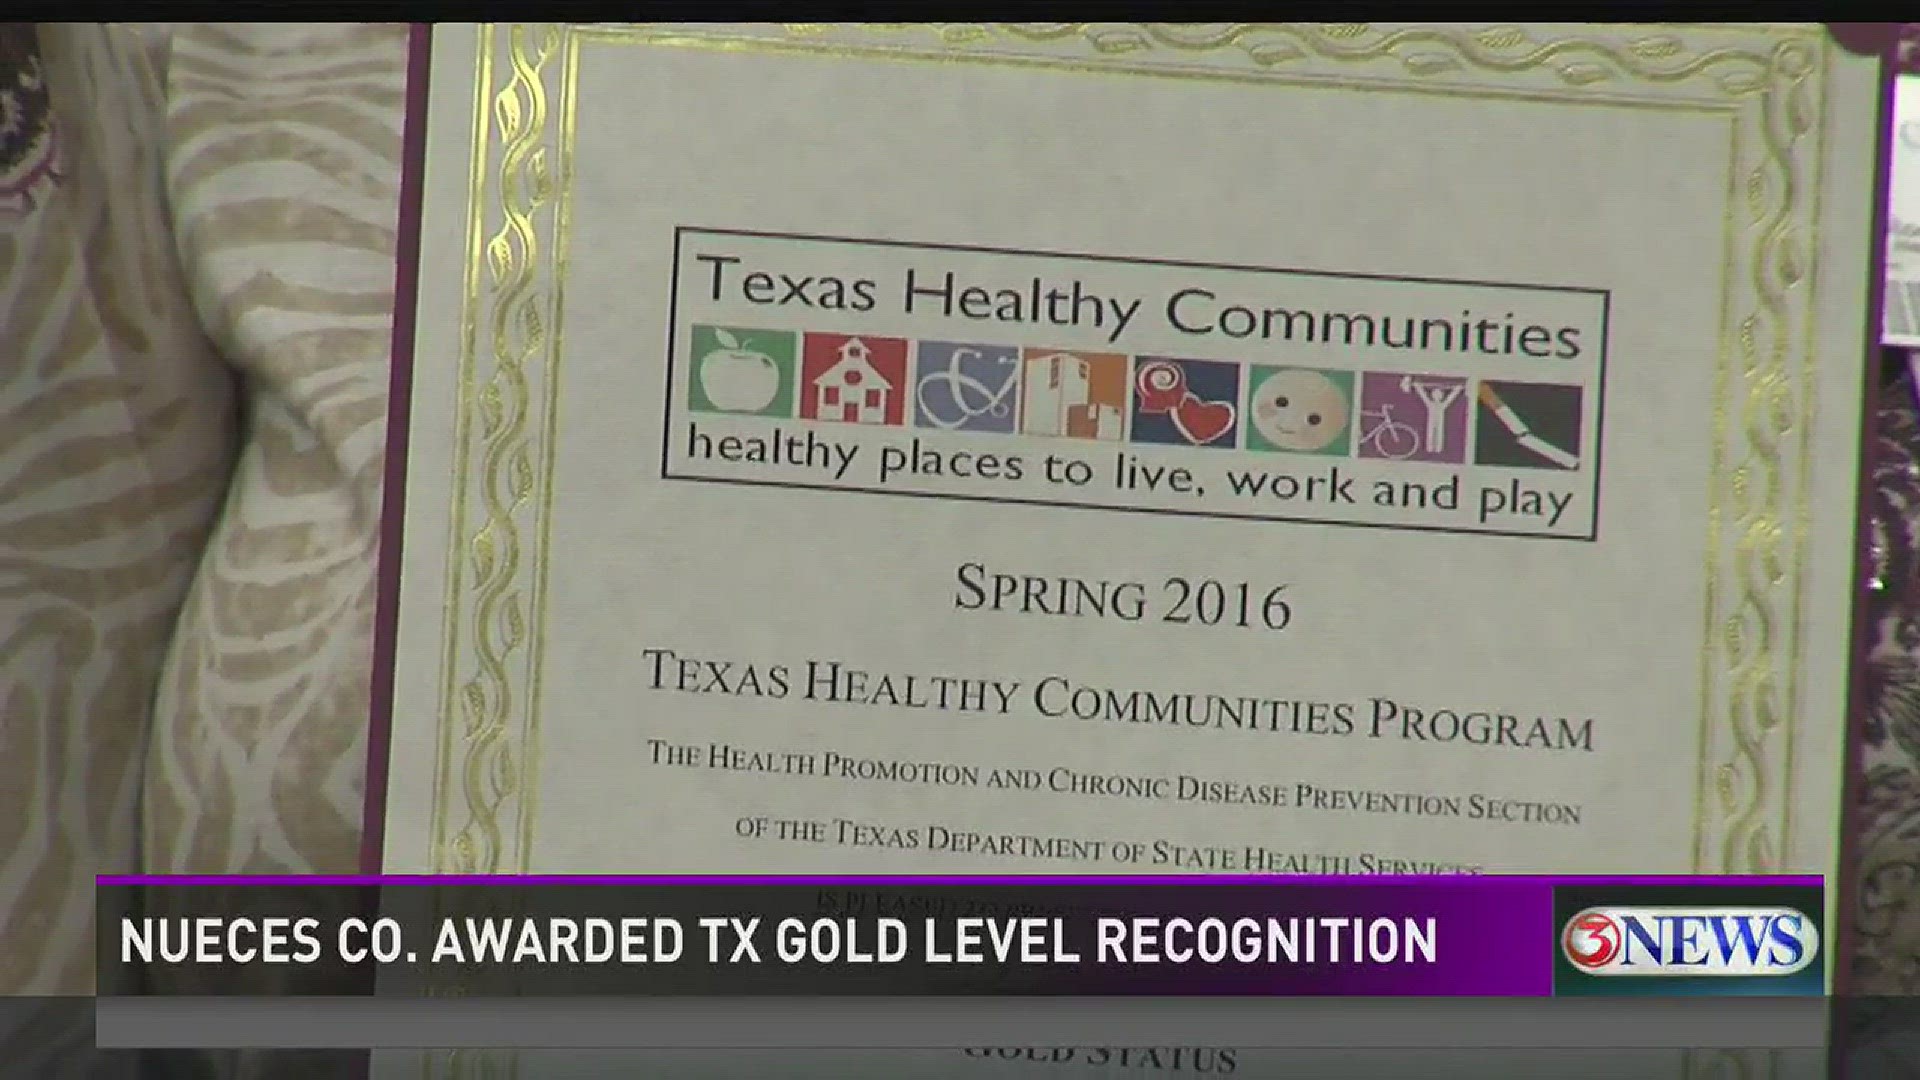 Nueces County was presented a gold level recognition as a healthy community.